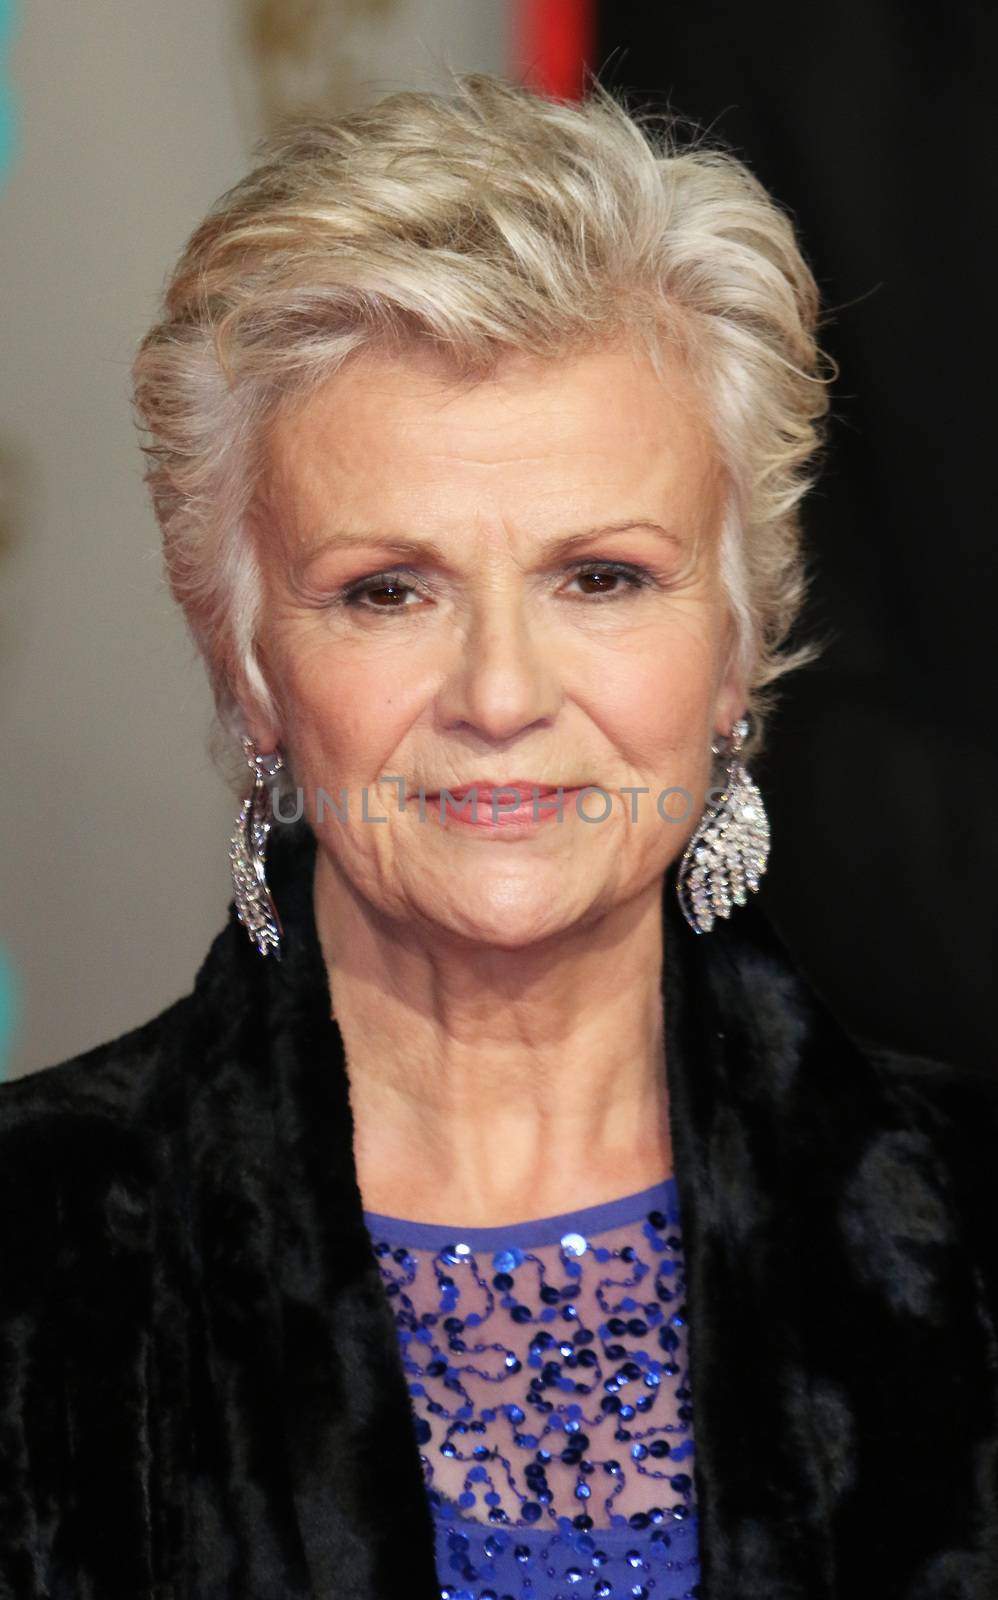 UK, London: British actress Julie Walters poses on the red Carpet at the EE British Academy Film Awards, BAFTA Awards, at the Royal Opera House in London, England, on 14 February 2016.